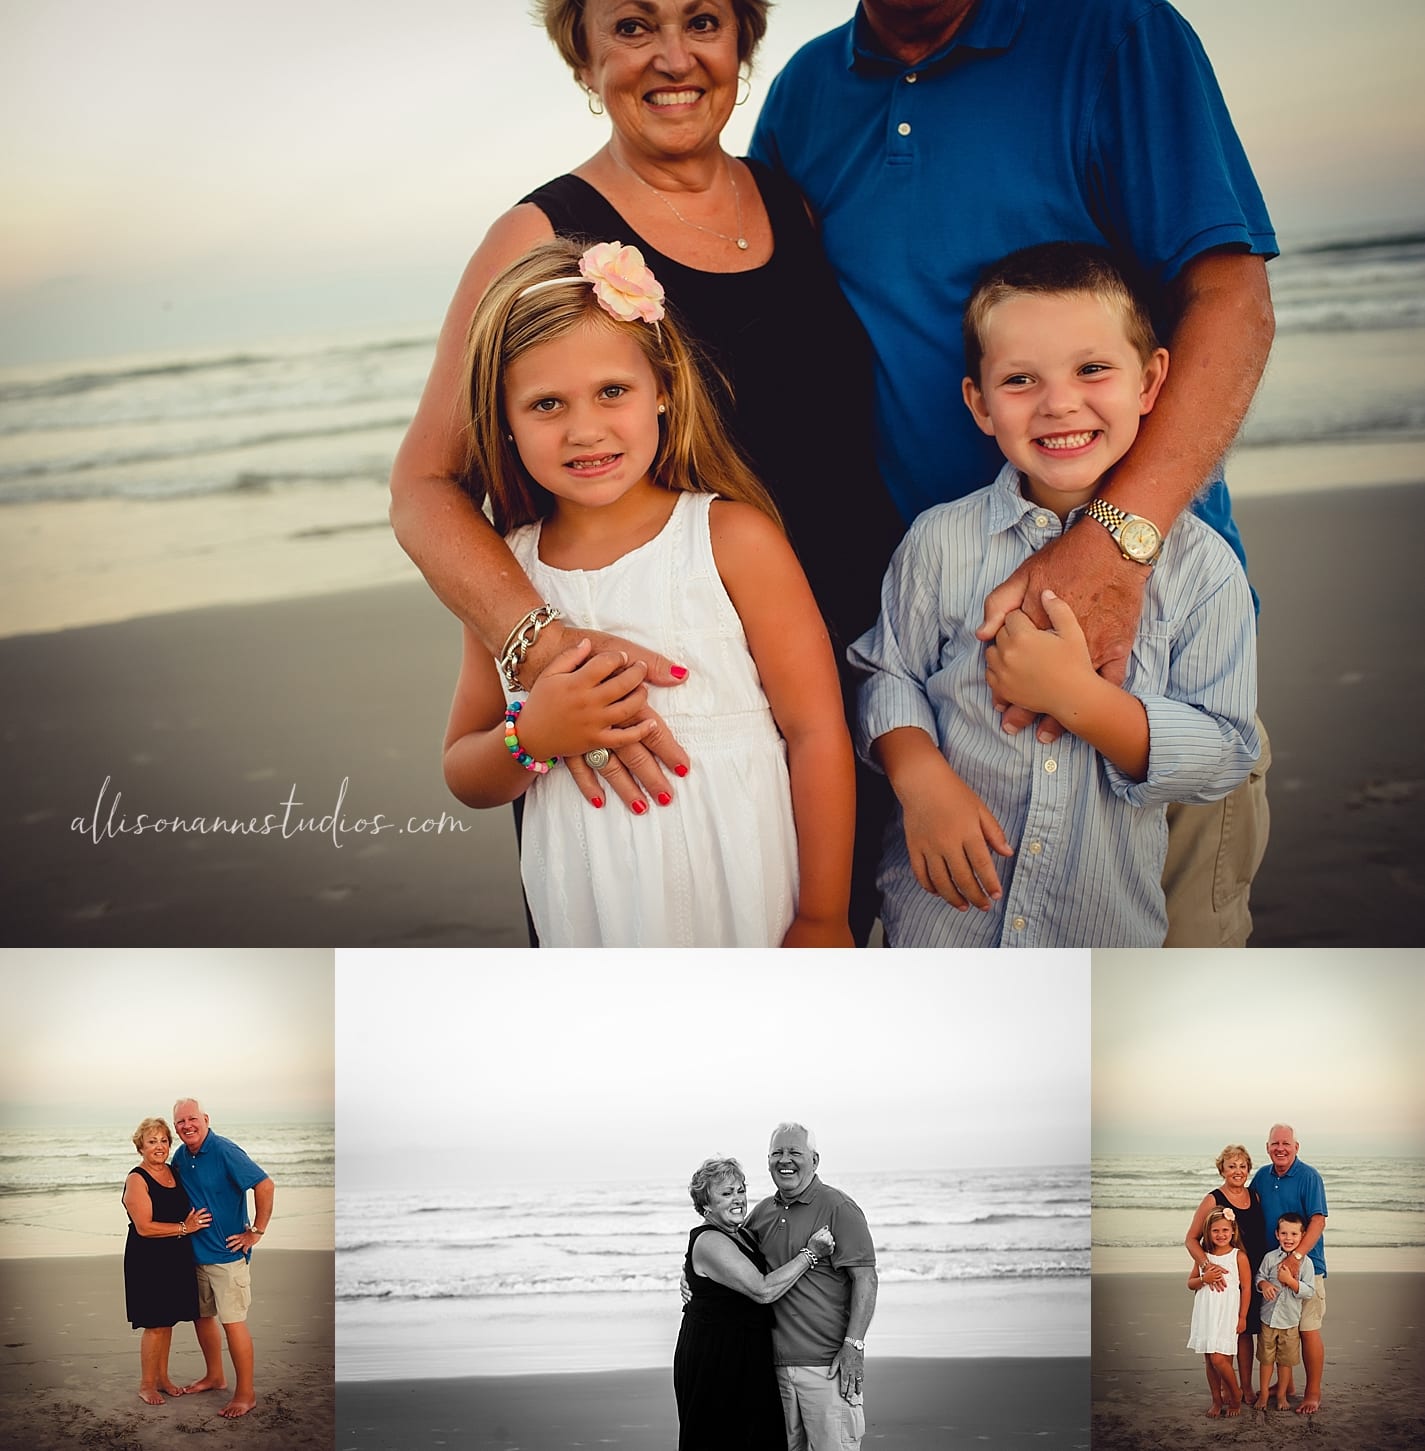 Family, forget-me-not, wildwood, hammonton, i love summer, allisonanne Studios, allison gallagher, toes in the sand, awesome people, love, bartering, sunset, beach session, best photographer in south jersey, shore house, love